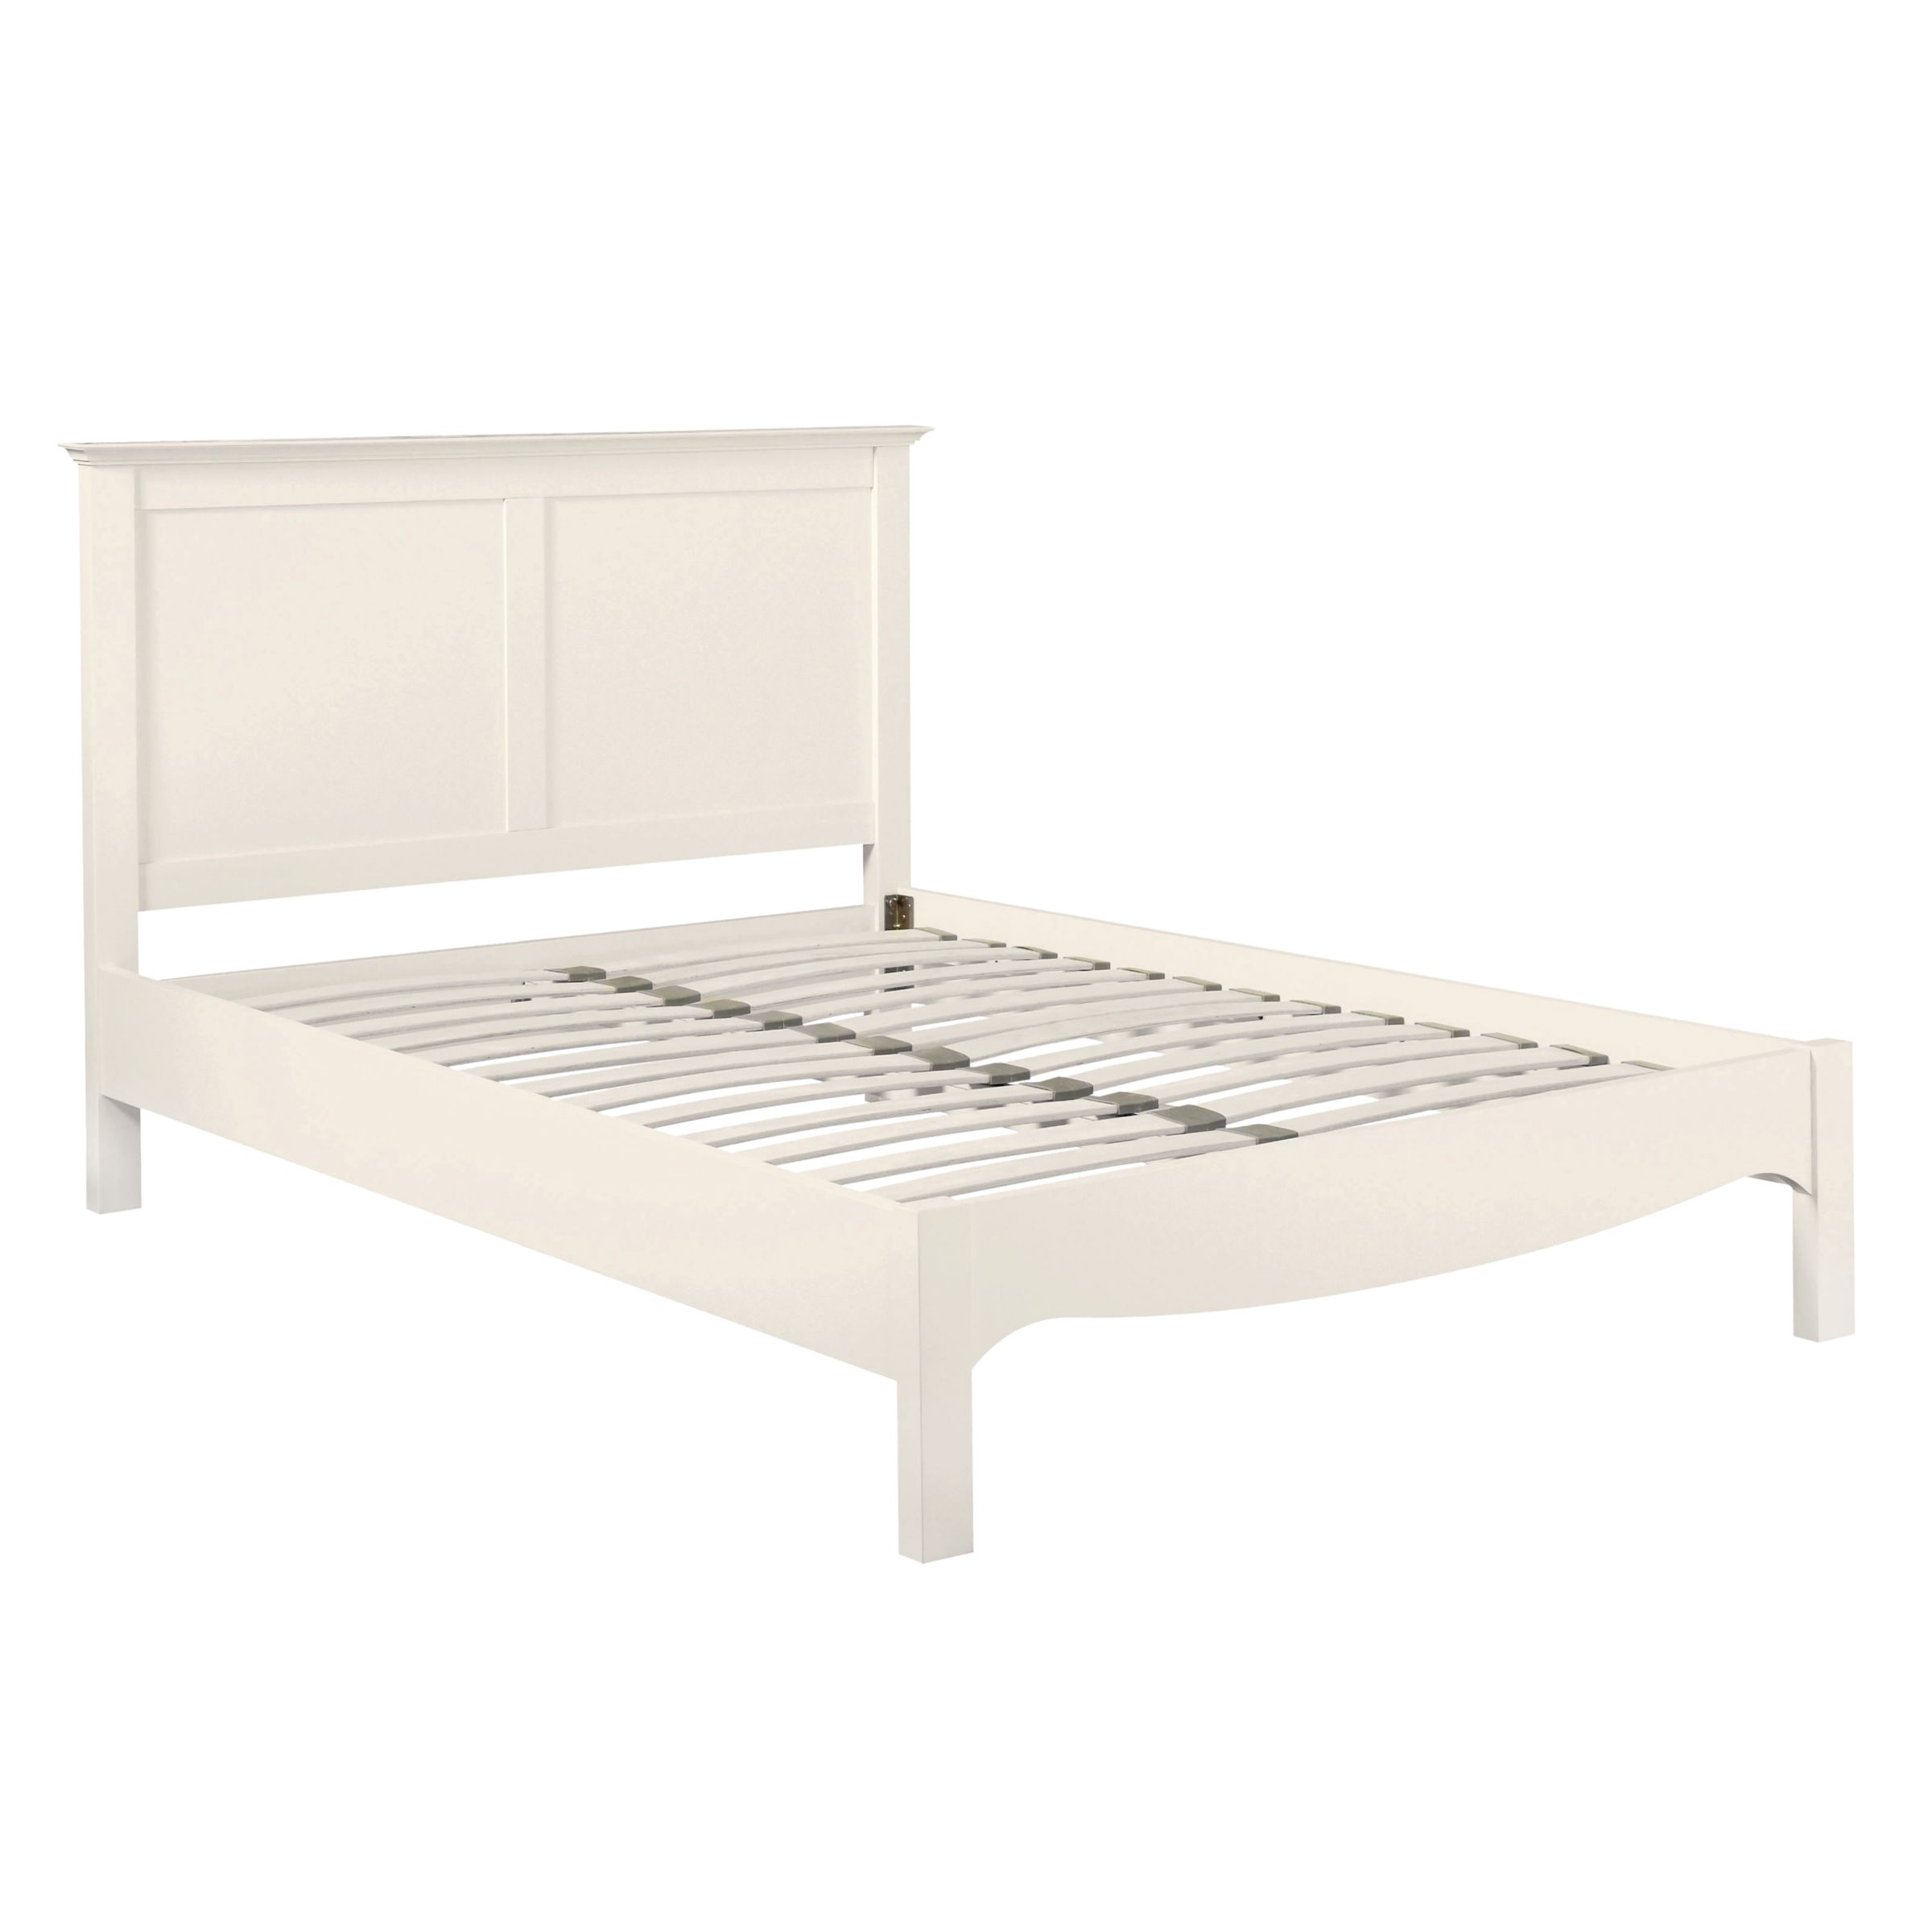 John Lewis Darcy Low End Bedstead, Double, Ivory at John Lewis